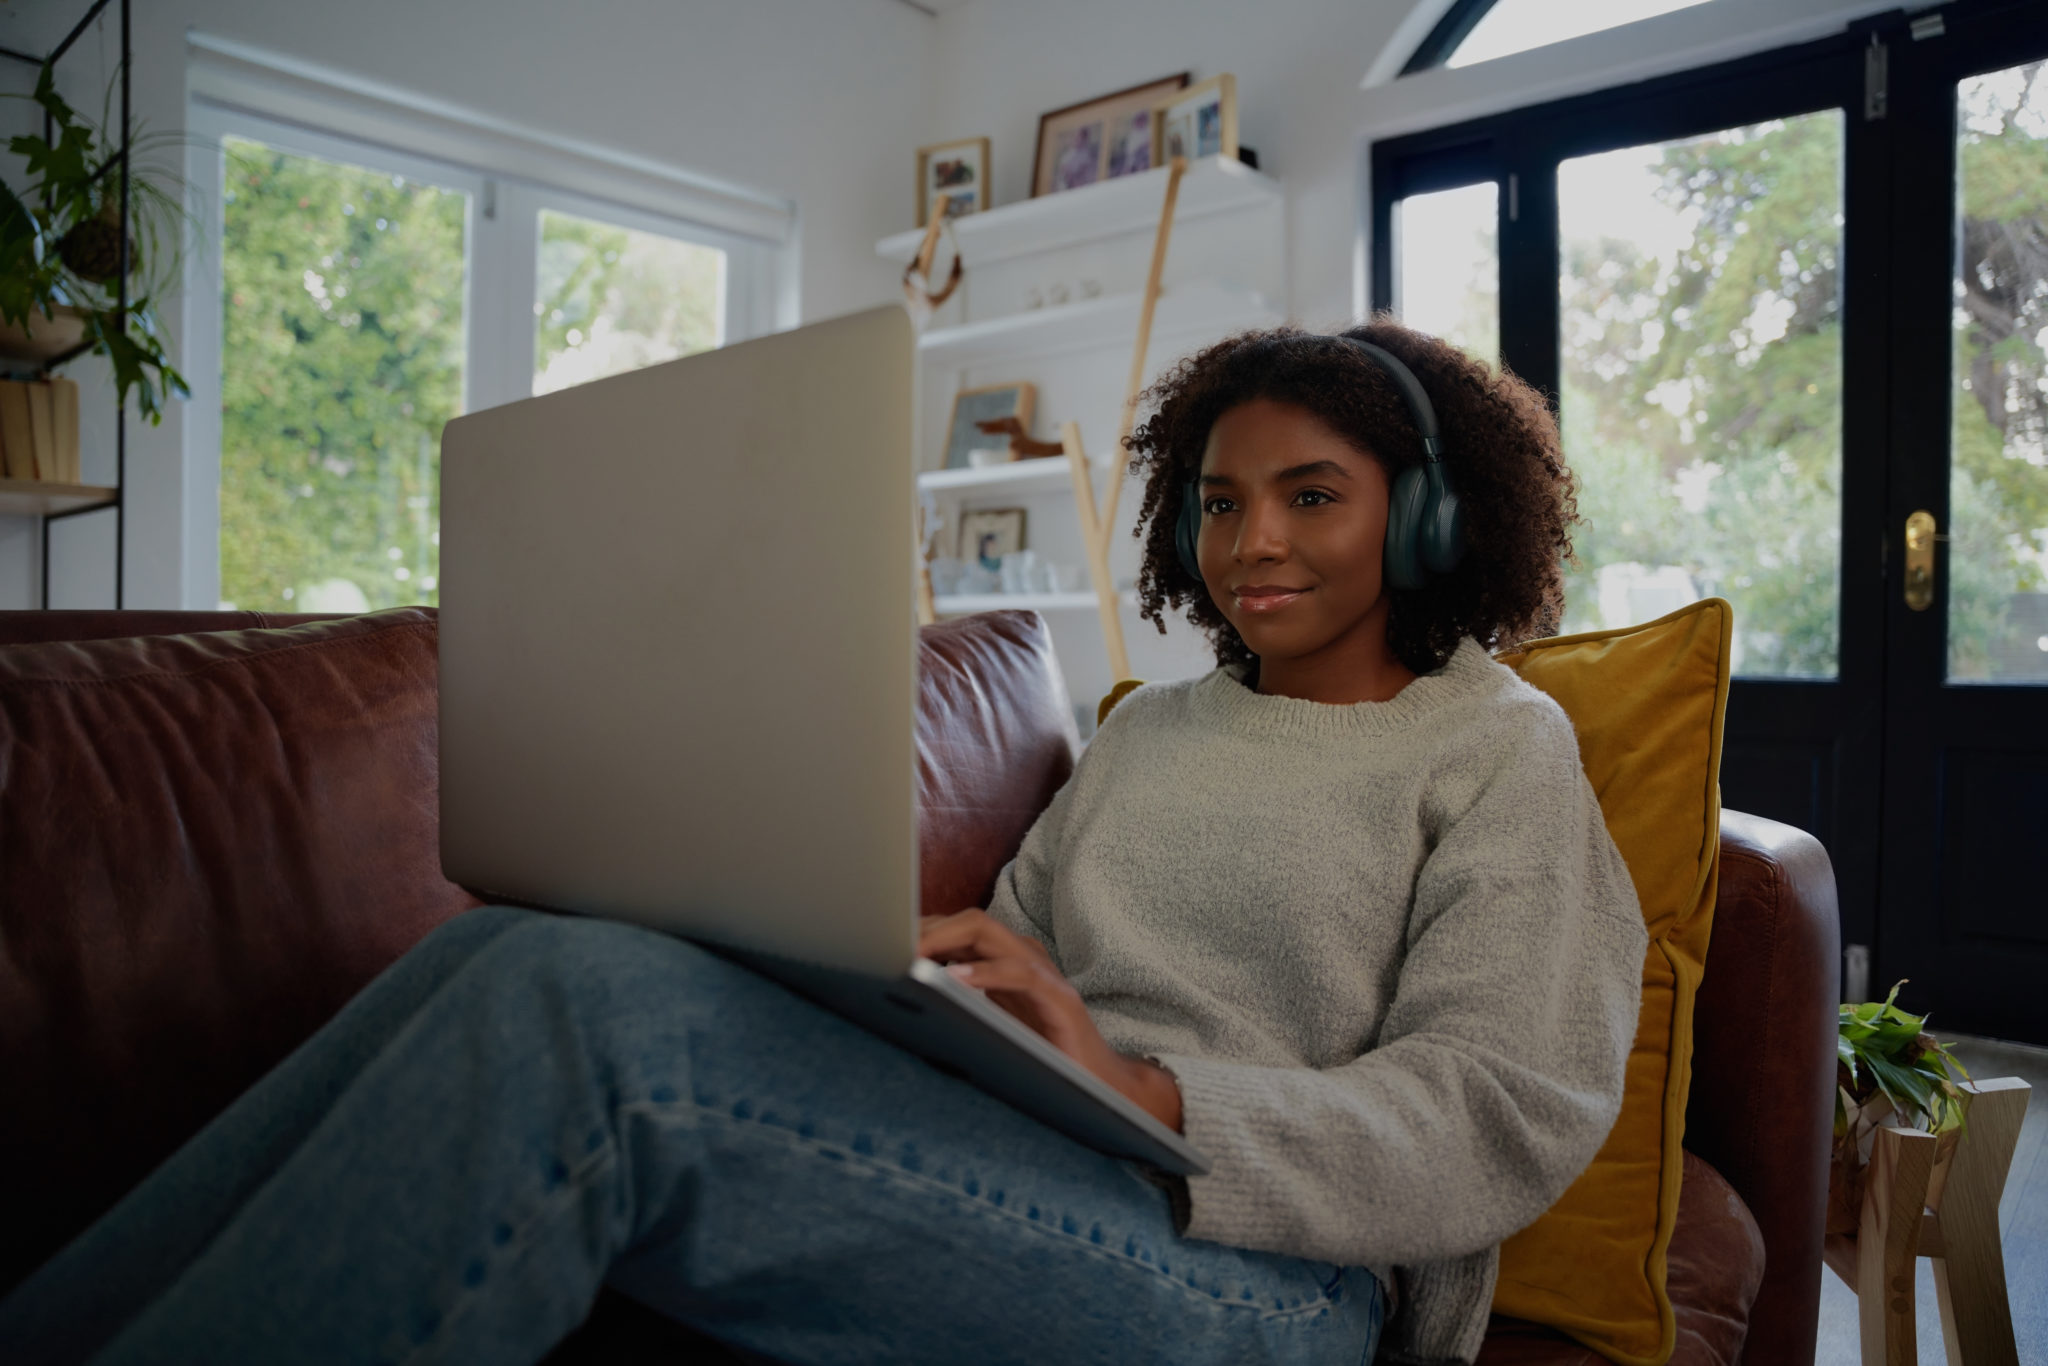 Young person sitting on couch wearing large headphones